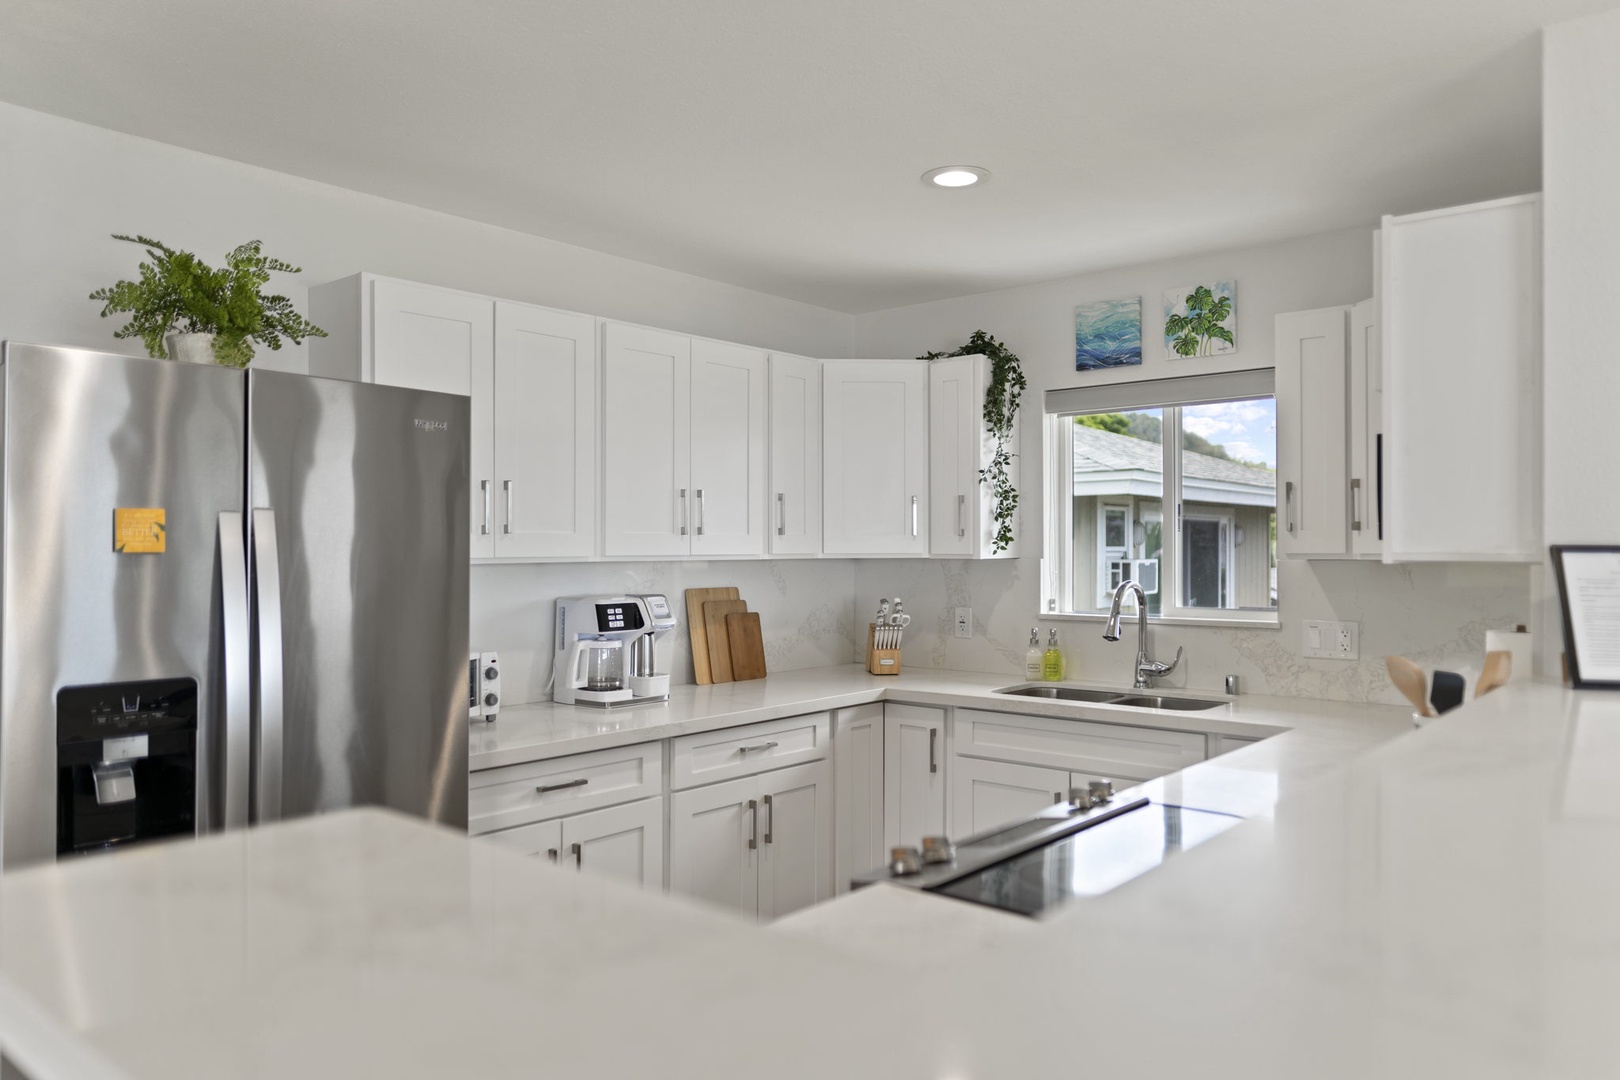 Haleiwa Vacation Rentals, Hale Nalu - The upstairs kitchen is updated and spacious with lots of natural light